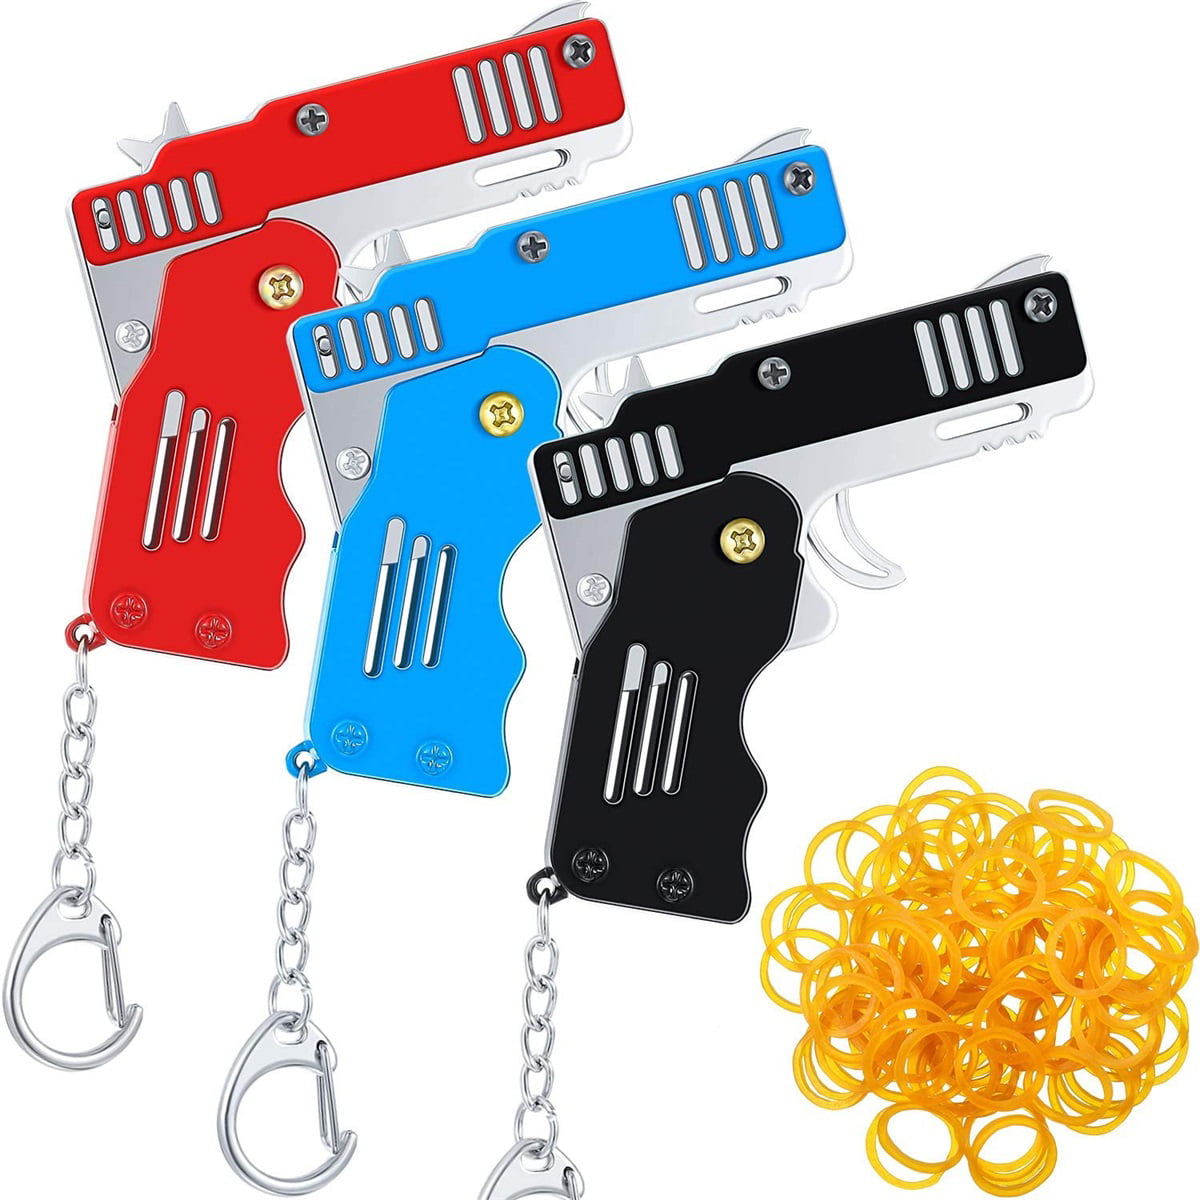 Rubber Band Gun Mini Metal Folding 6-Shot with Keychain and Rubber Band 